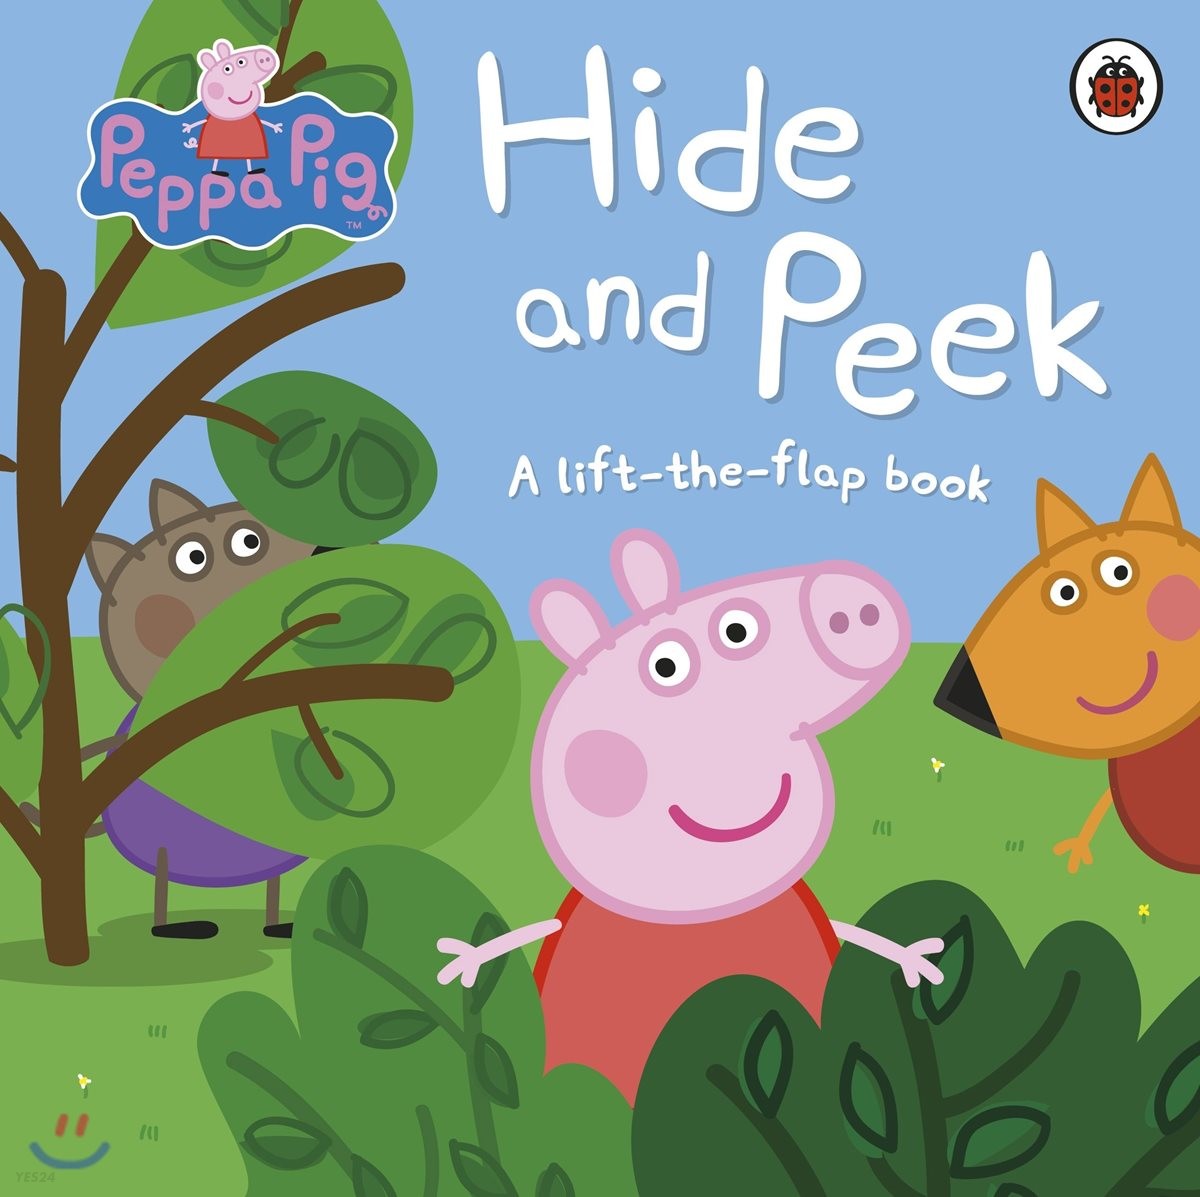 Hide and peek: a lift-the-flap book